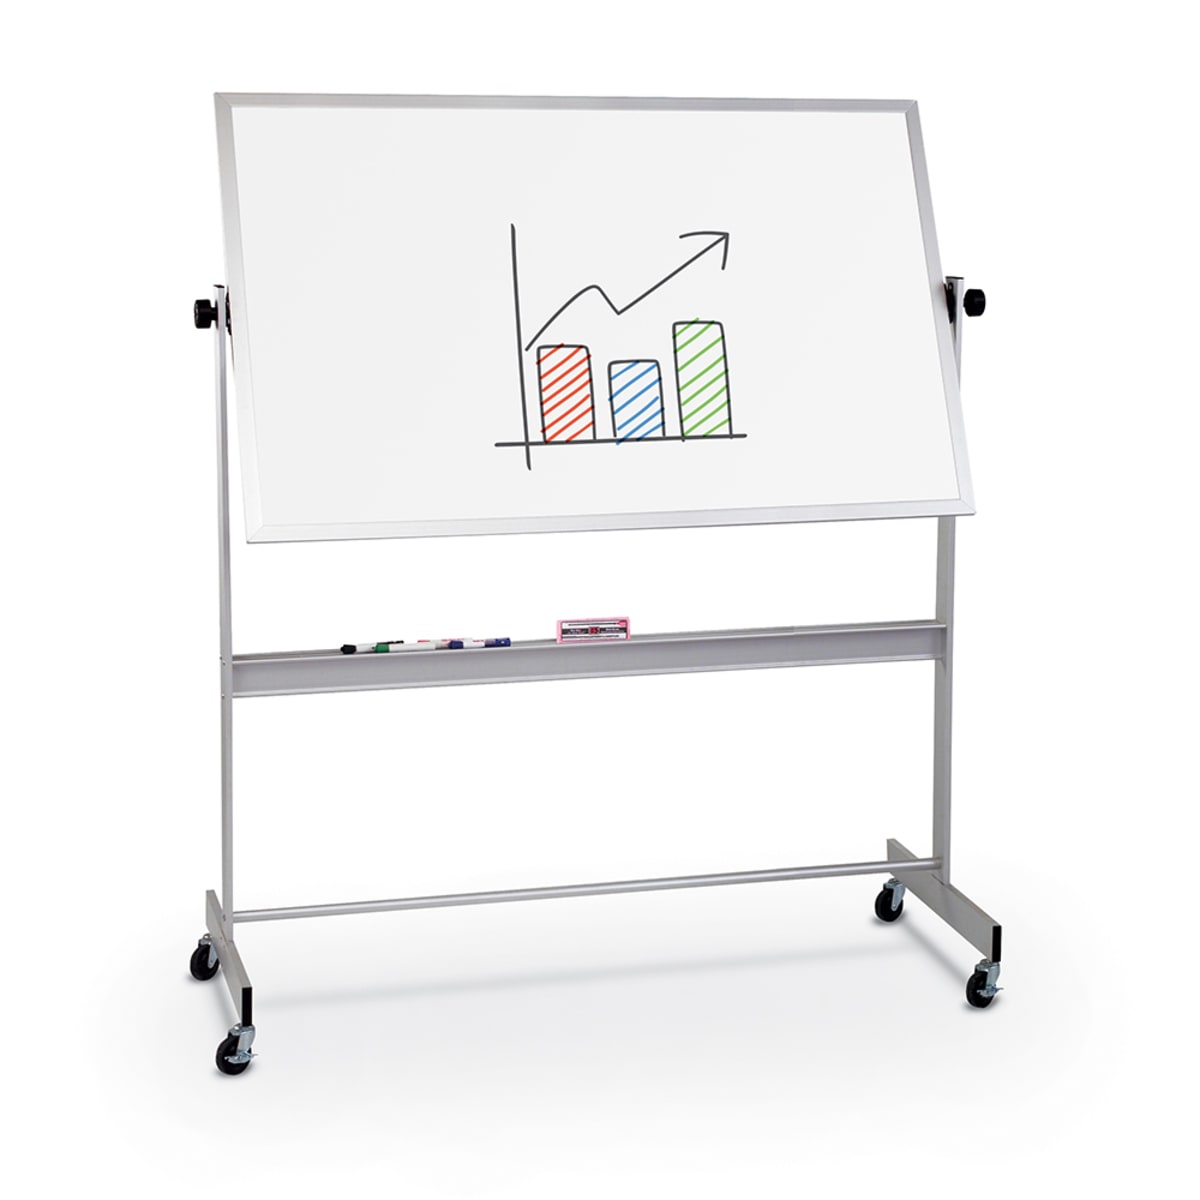 Mooreco Deluxe Mobile Reversible Board Dura-Rite Both sides - Aluminum Trim - 5'W x 4'H (Mooreco 668AF-HH) - SchoolOutlet